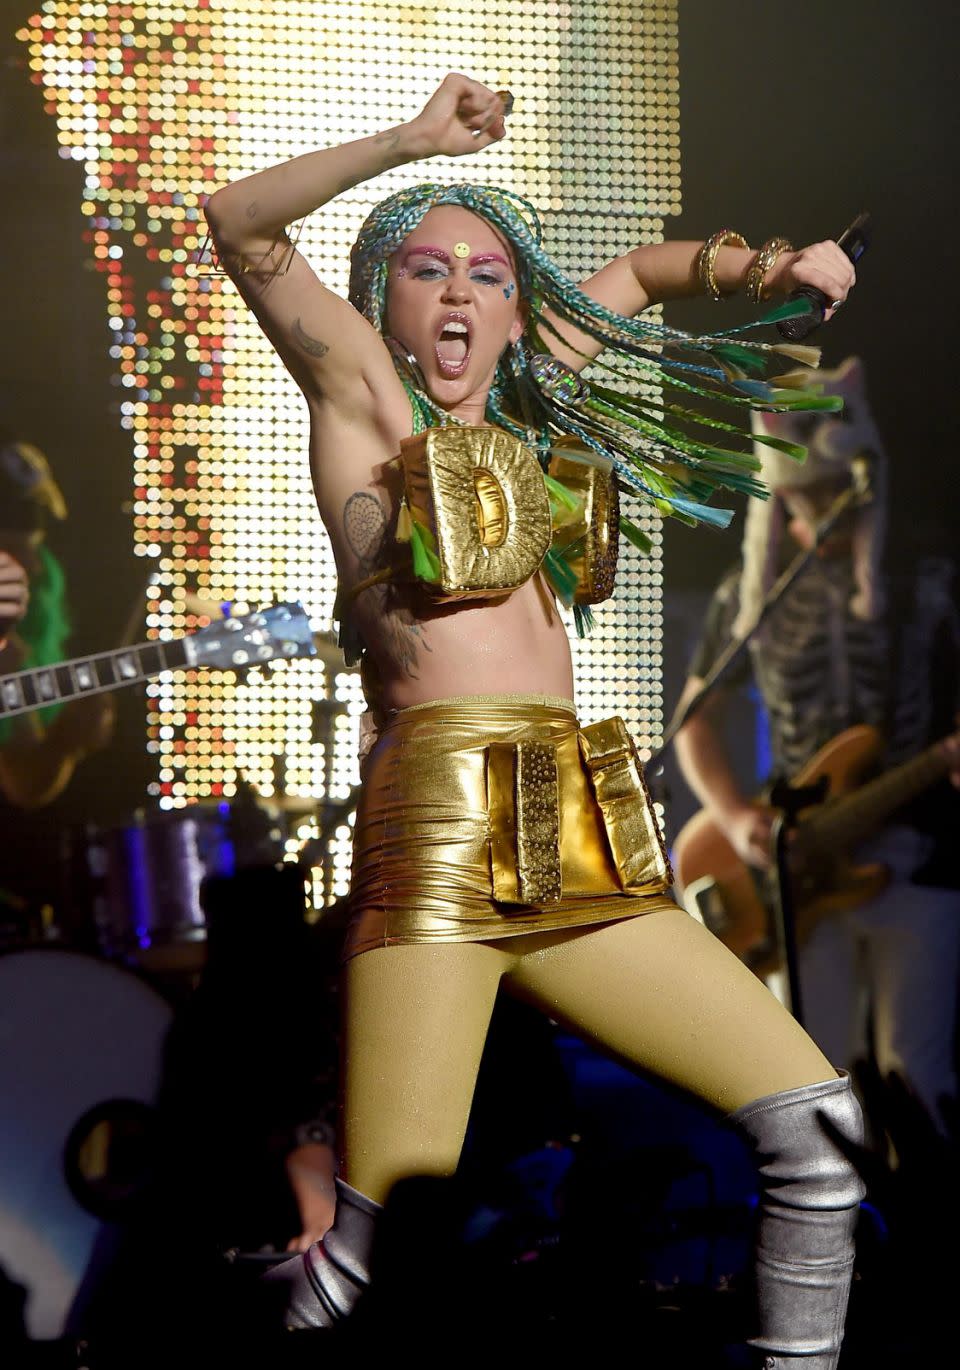 The wild Miley is a thing of the past! Source: Getty